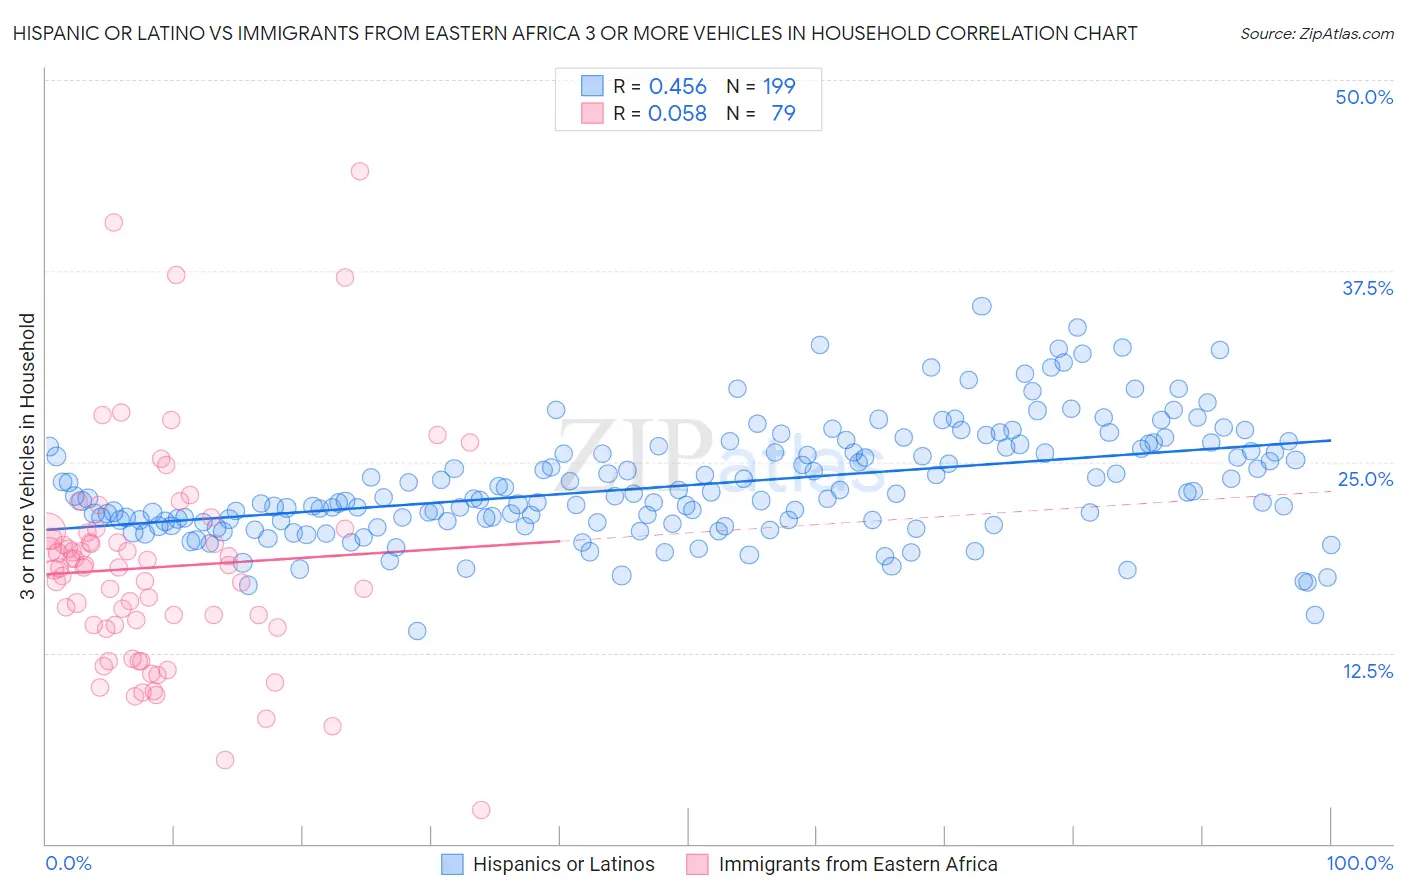 Hispanic or Latino vs Immigrants from Eastern Africa 3 or more Vehicles in Household